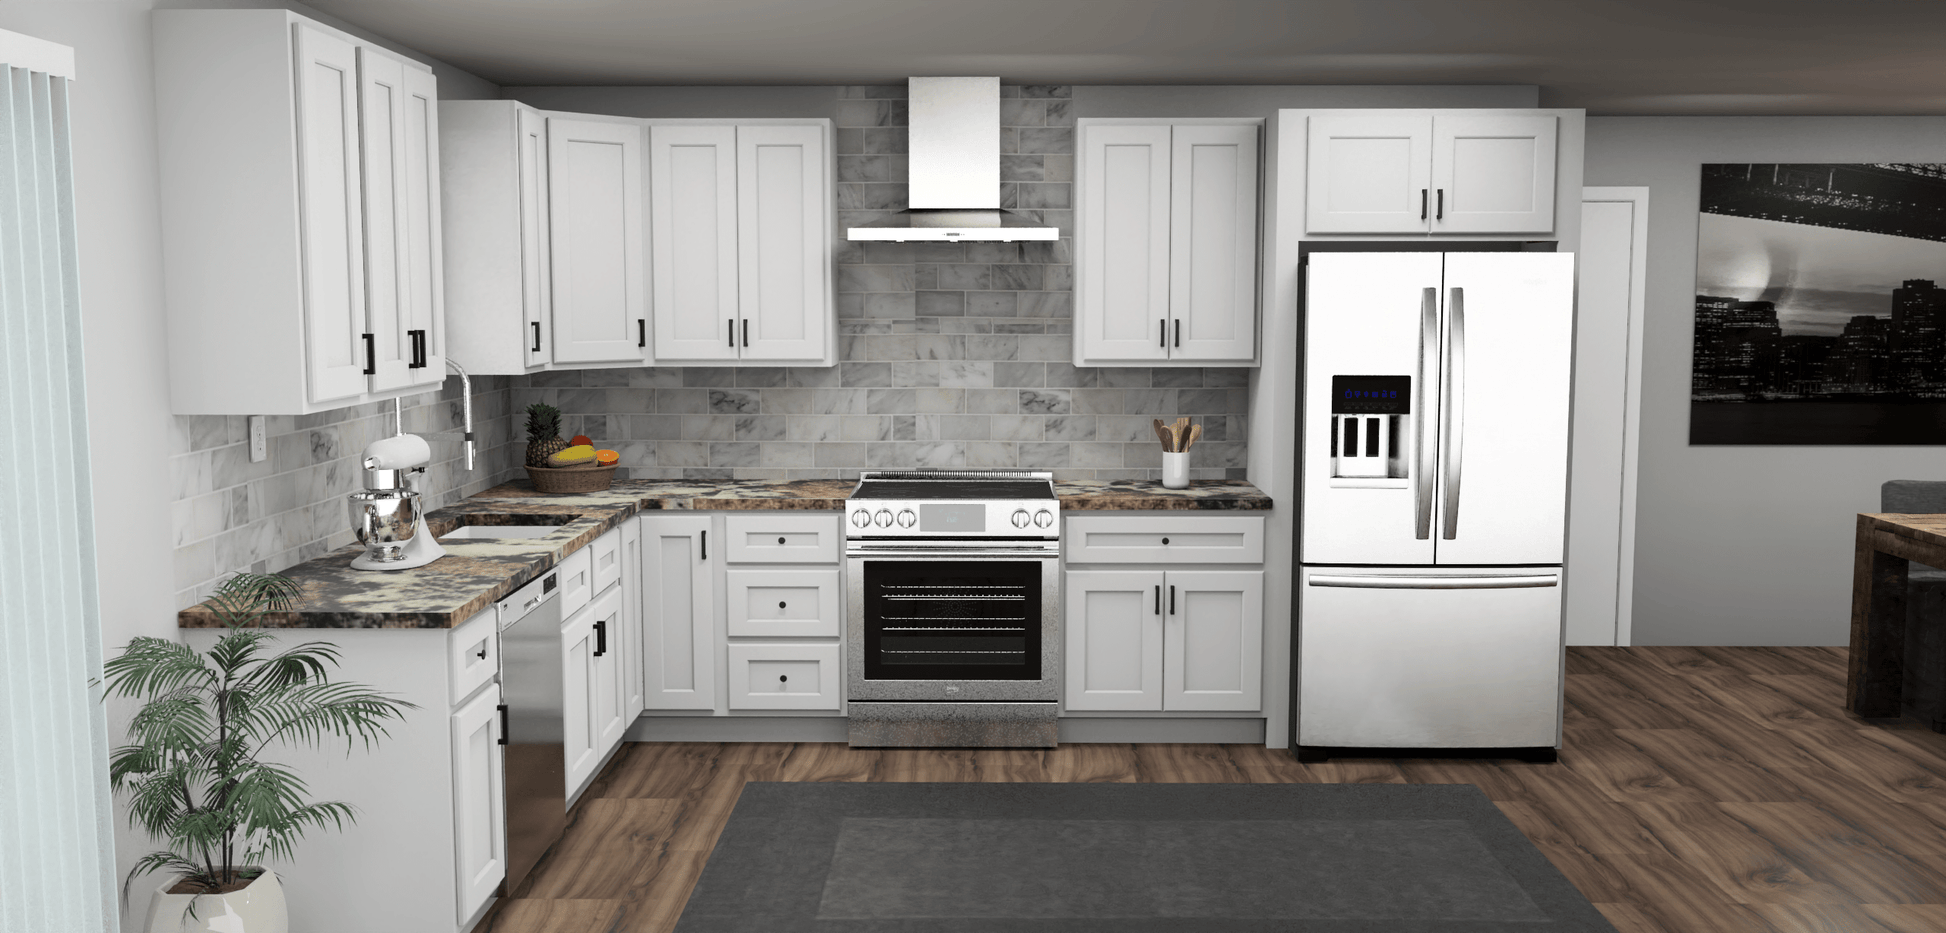 Fabuwood Quest Metro Frost 9 x 13 L Shaped Kitchen | Cabinets